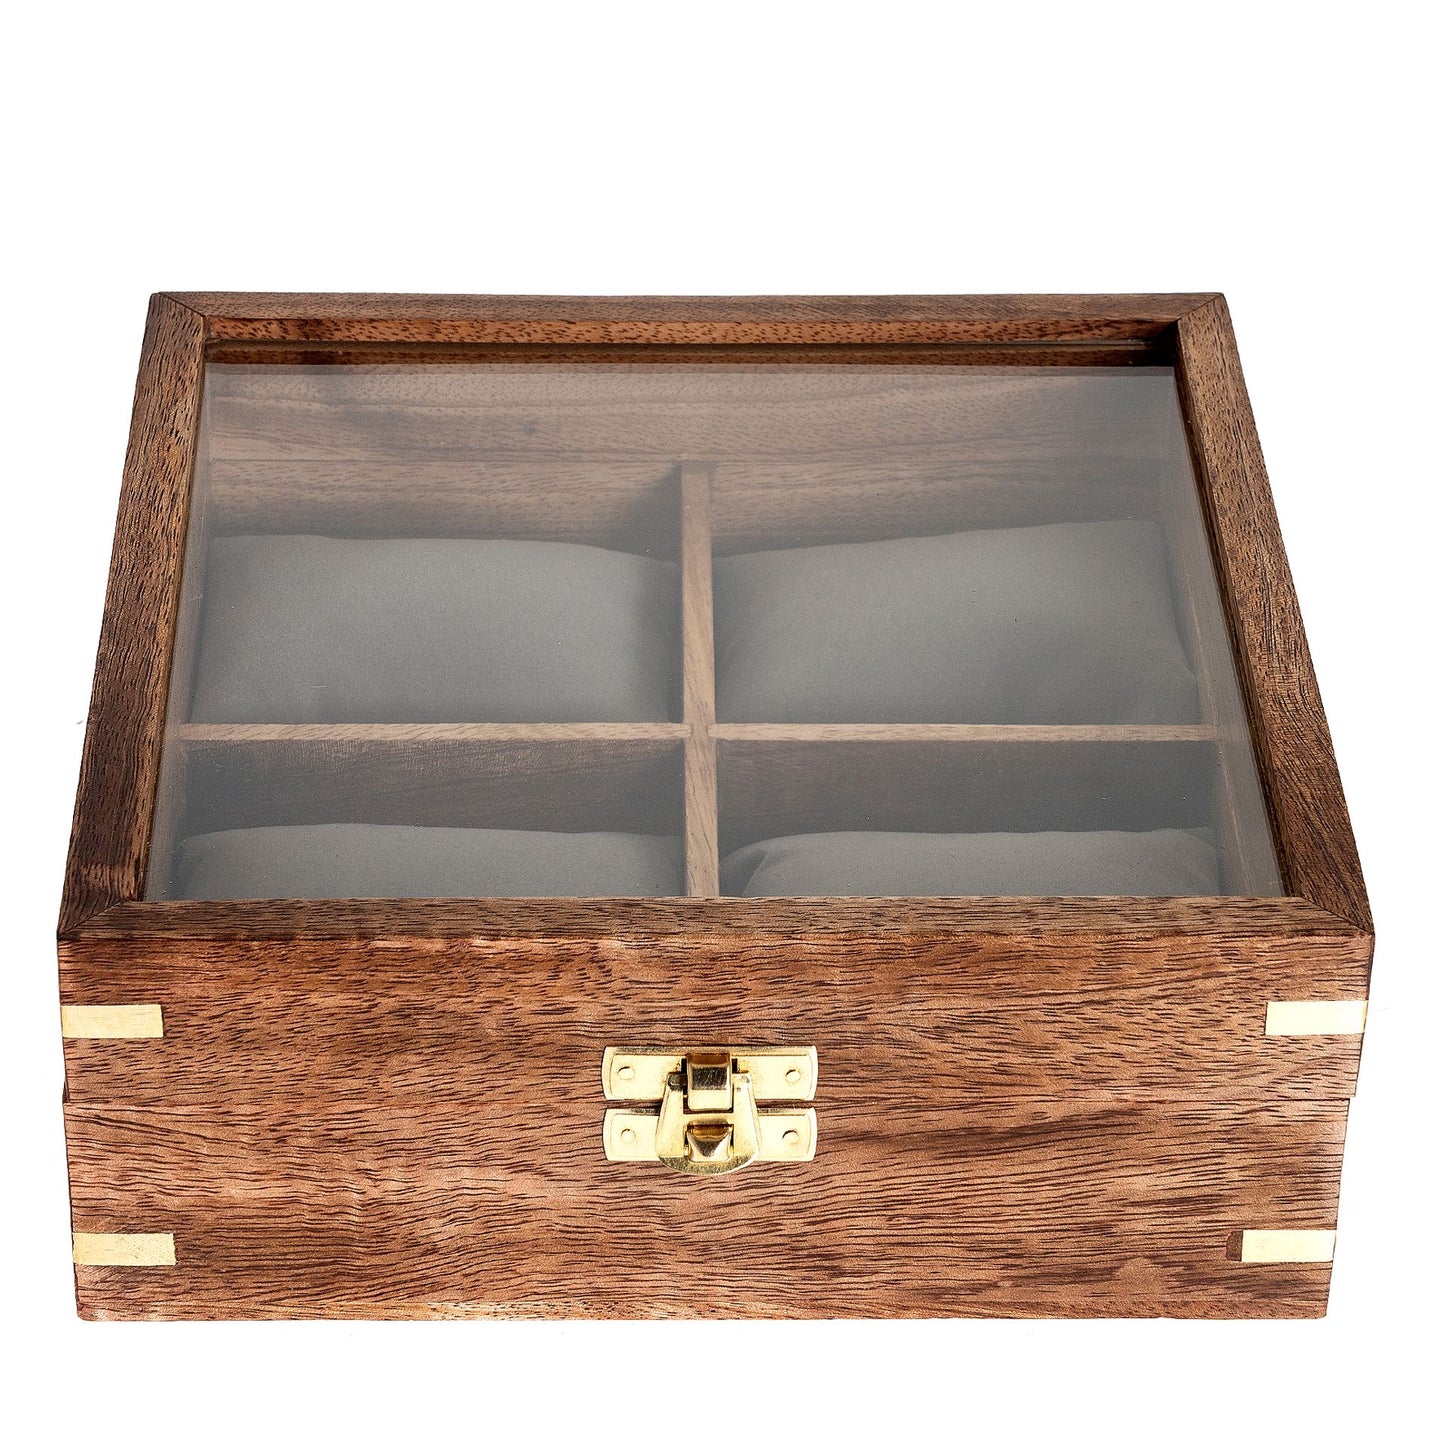 Wooden Watch Box Holds 4 Watches